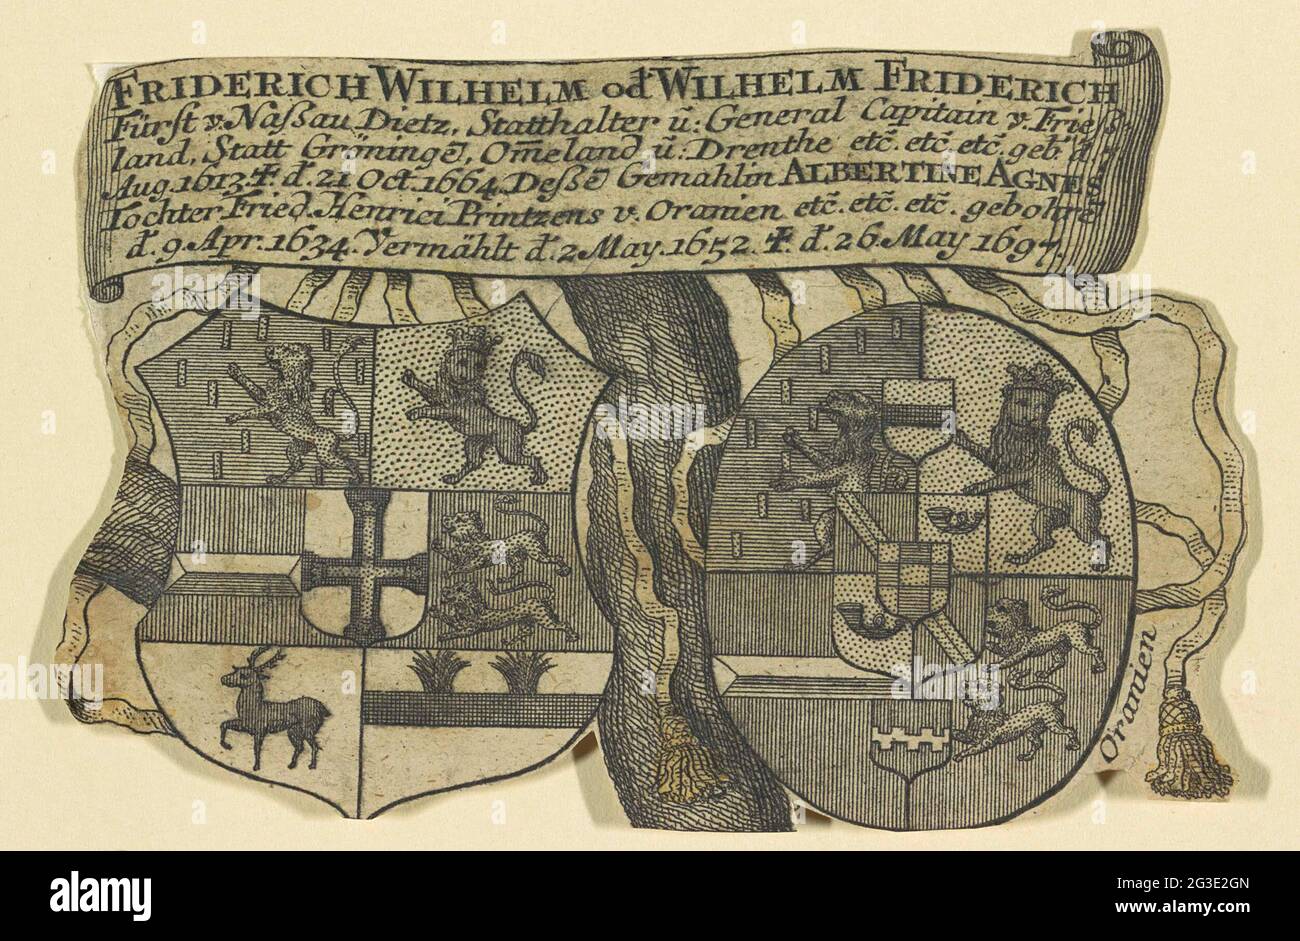 Weapons of Willem Frederik, Count of Nassau-Dietz, and Albertine Agnes, Princess of Orange. Weapons of Willem Frederik and Albertine Agnes. In a cartouche six lines of Dutch text. Stock Photo